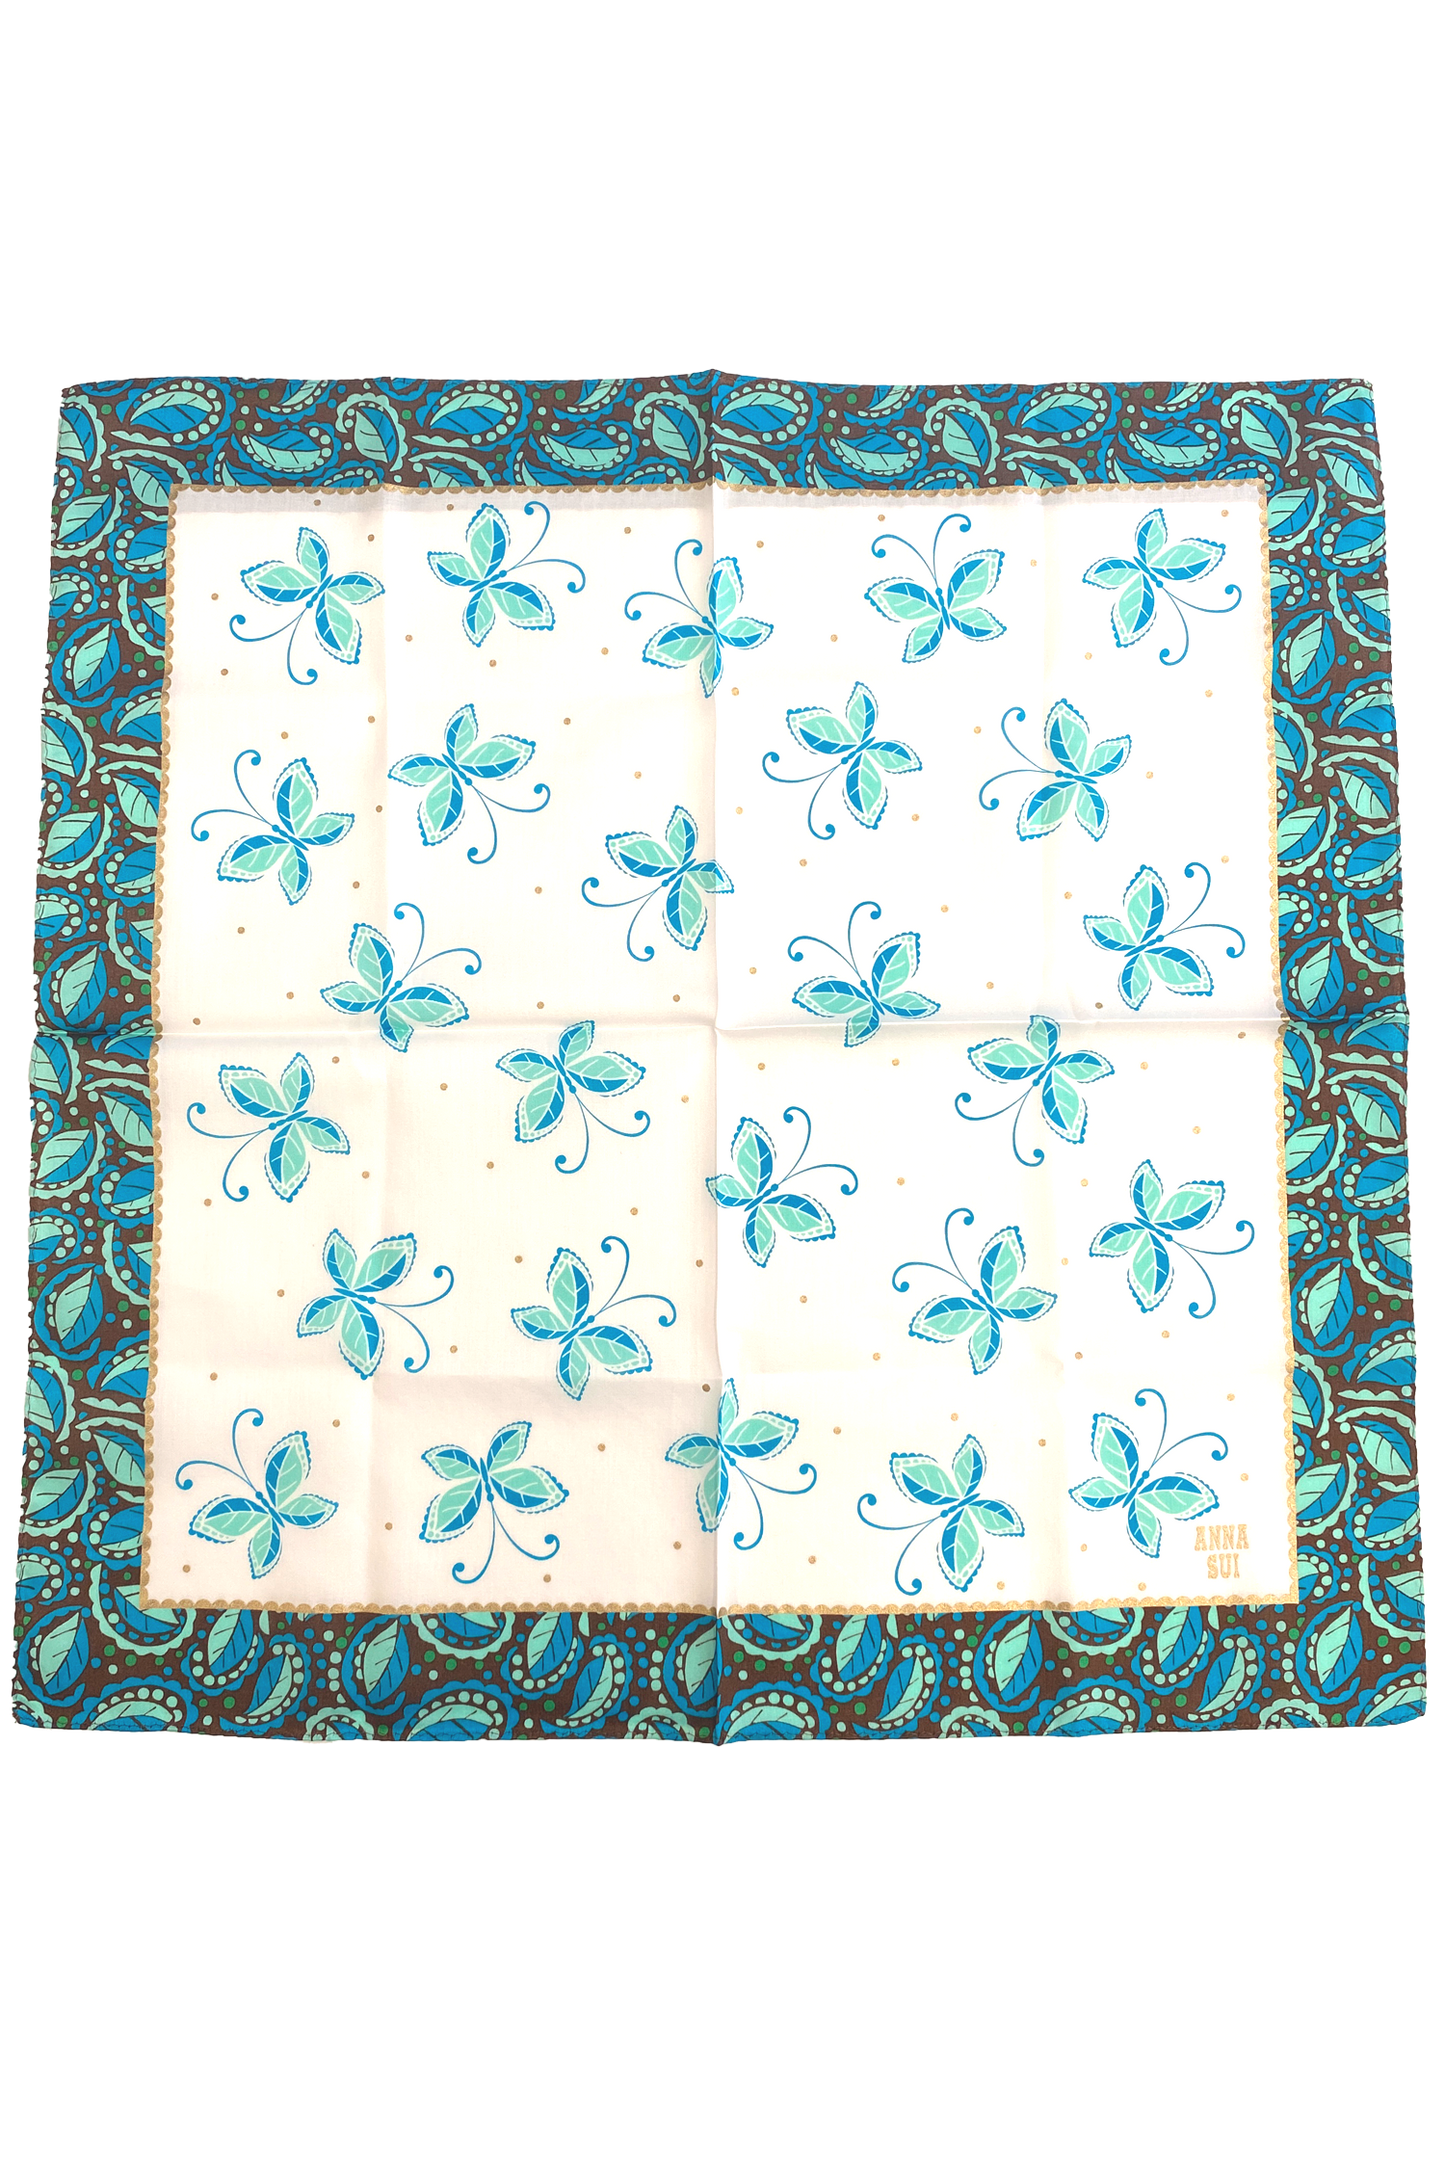 Handkerchief, squared white with pattern of green/blue butterfly floral brown/blue border